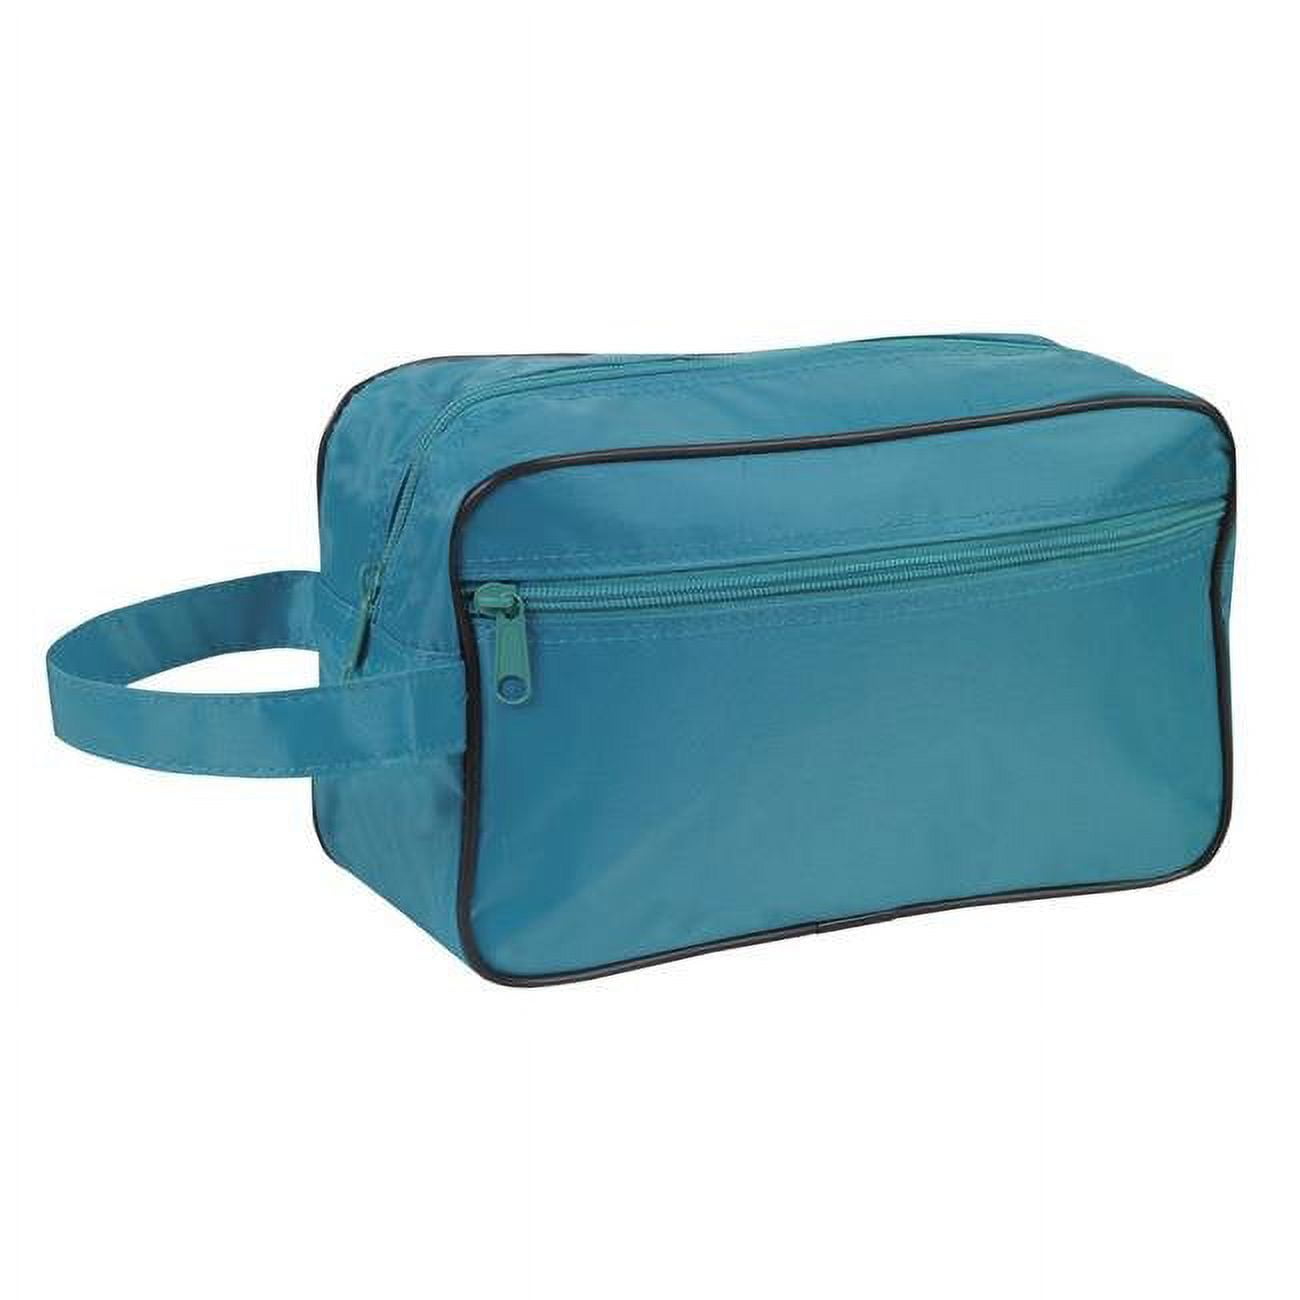 Picture of DDI 2334104 Toiletry Travel Bag - Teal Case of 100